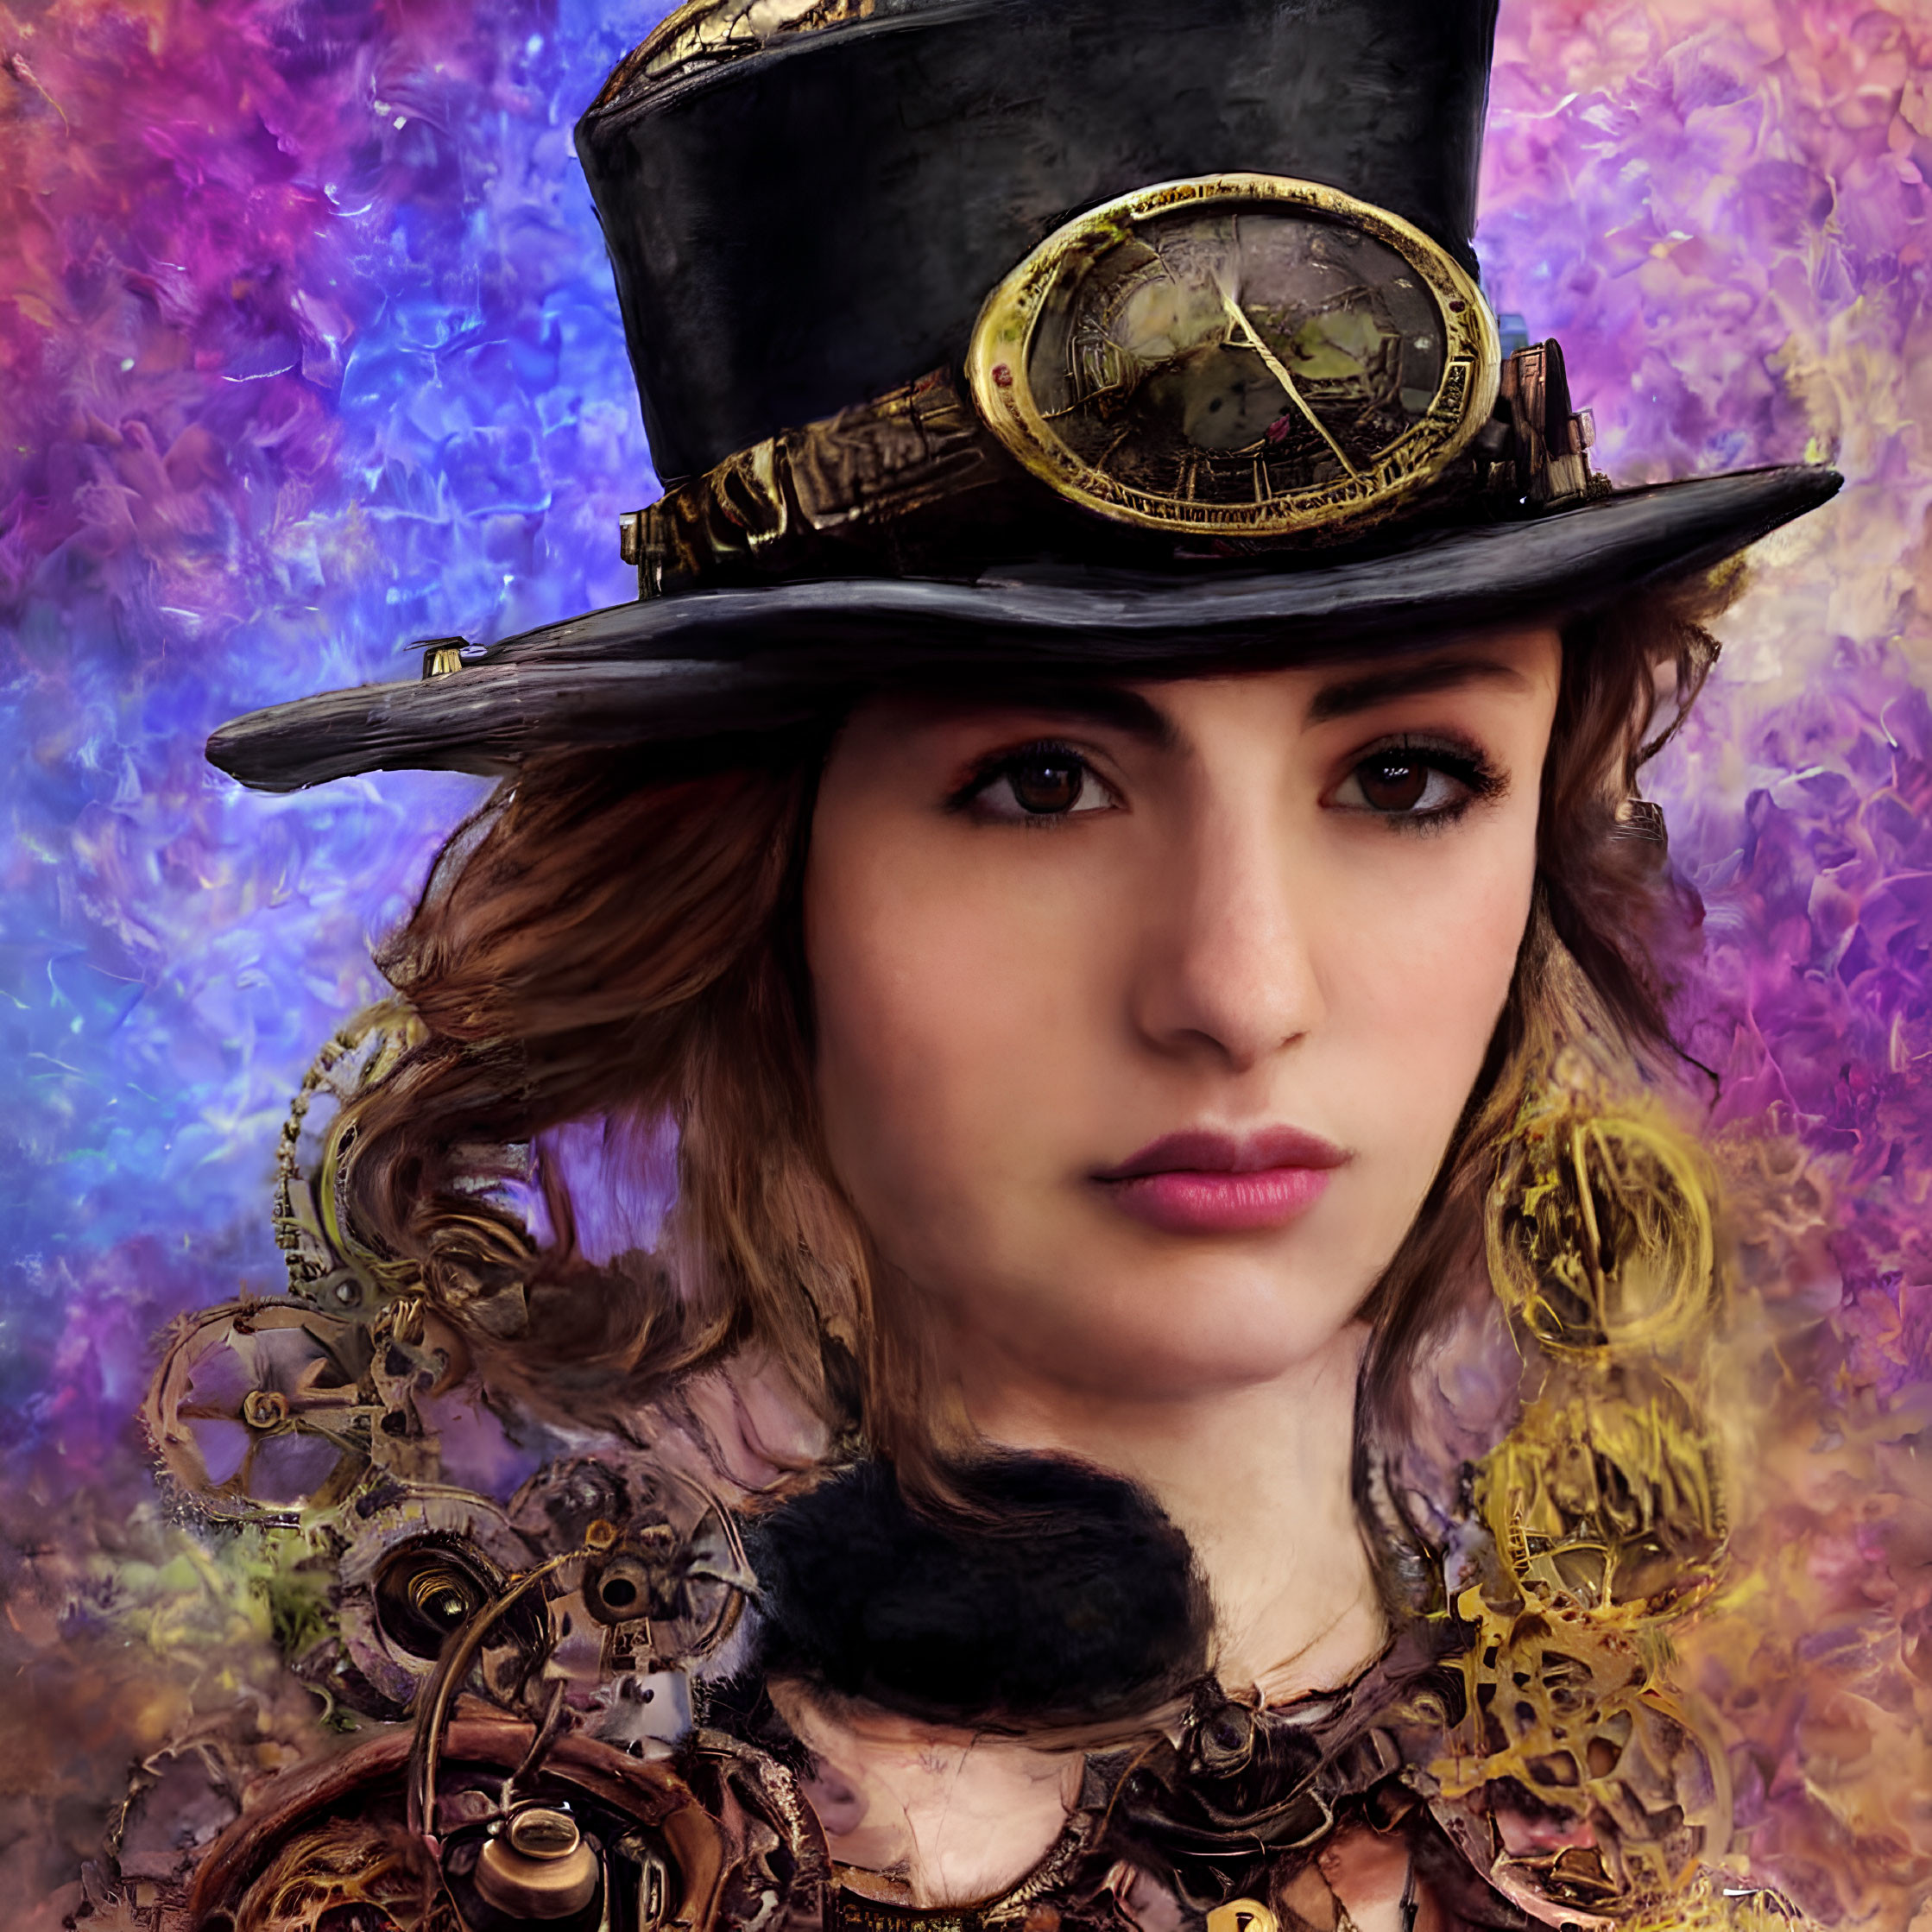 Steampunk hat woman on colorful textured background